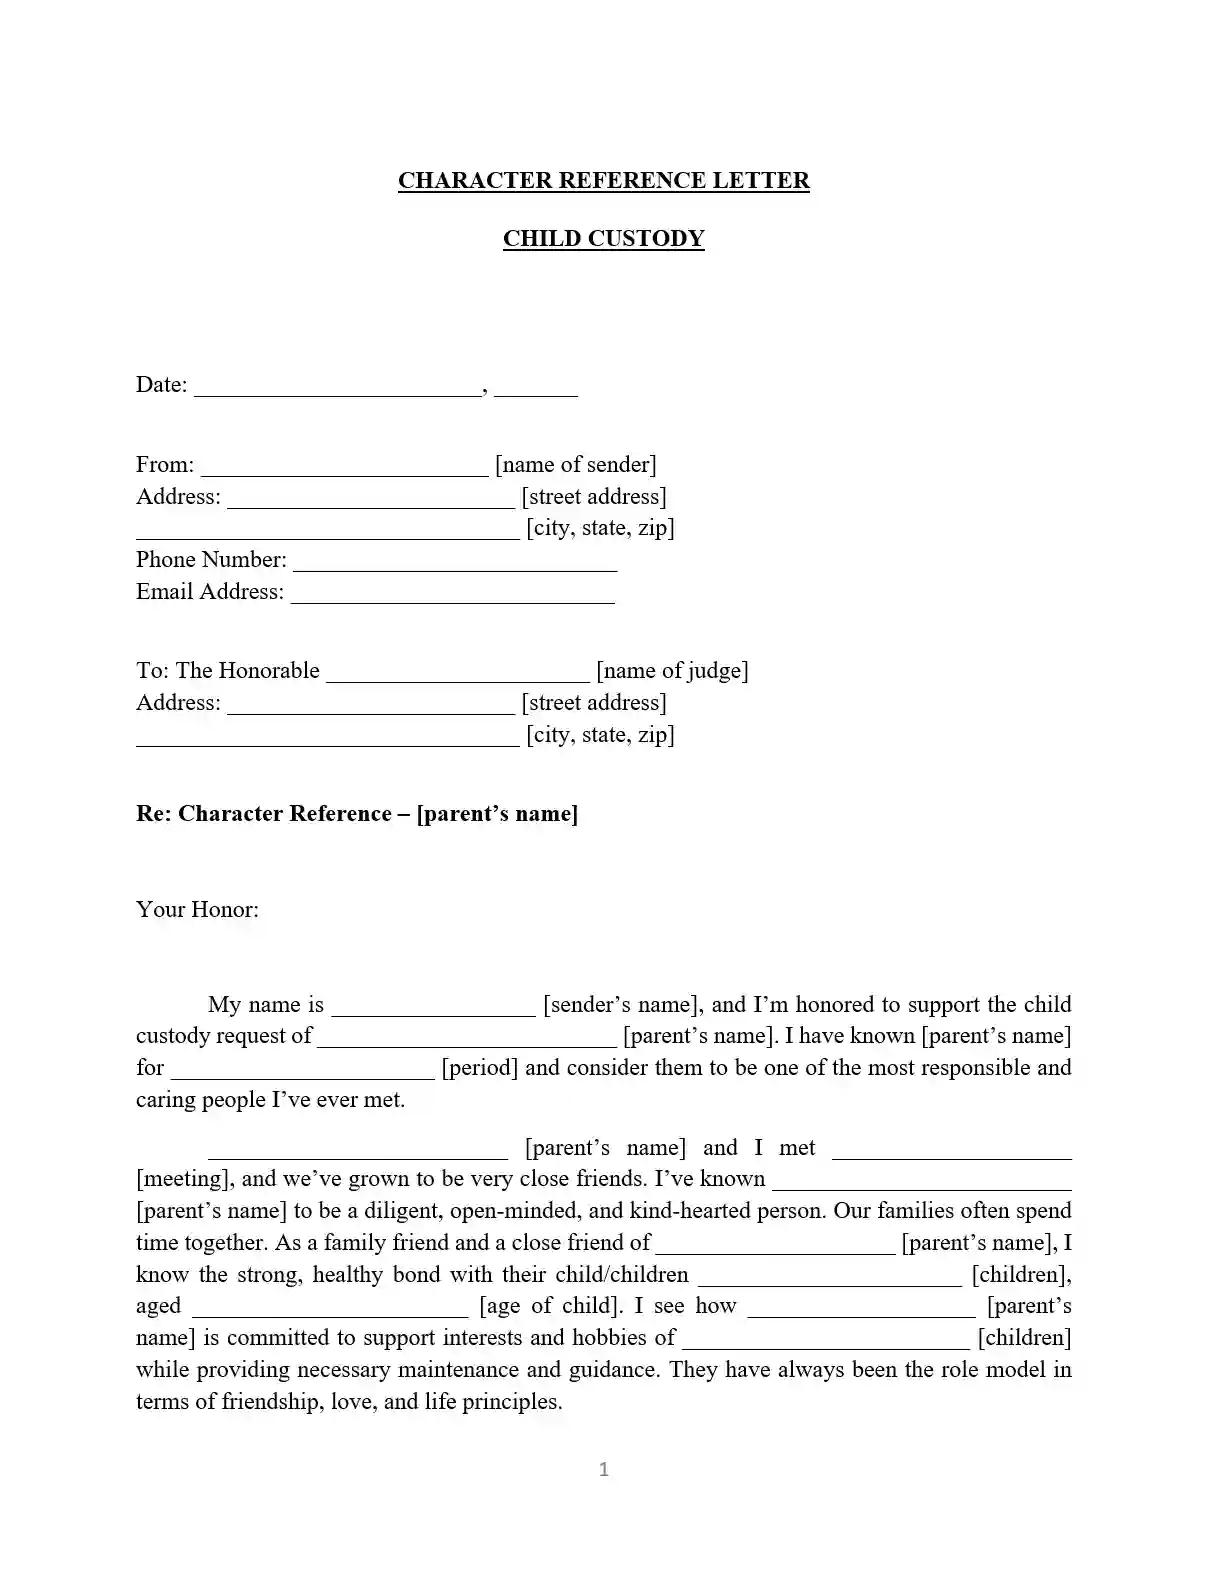 Character Reference Letter for Court Child Custody + Samples